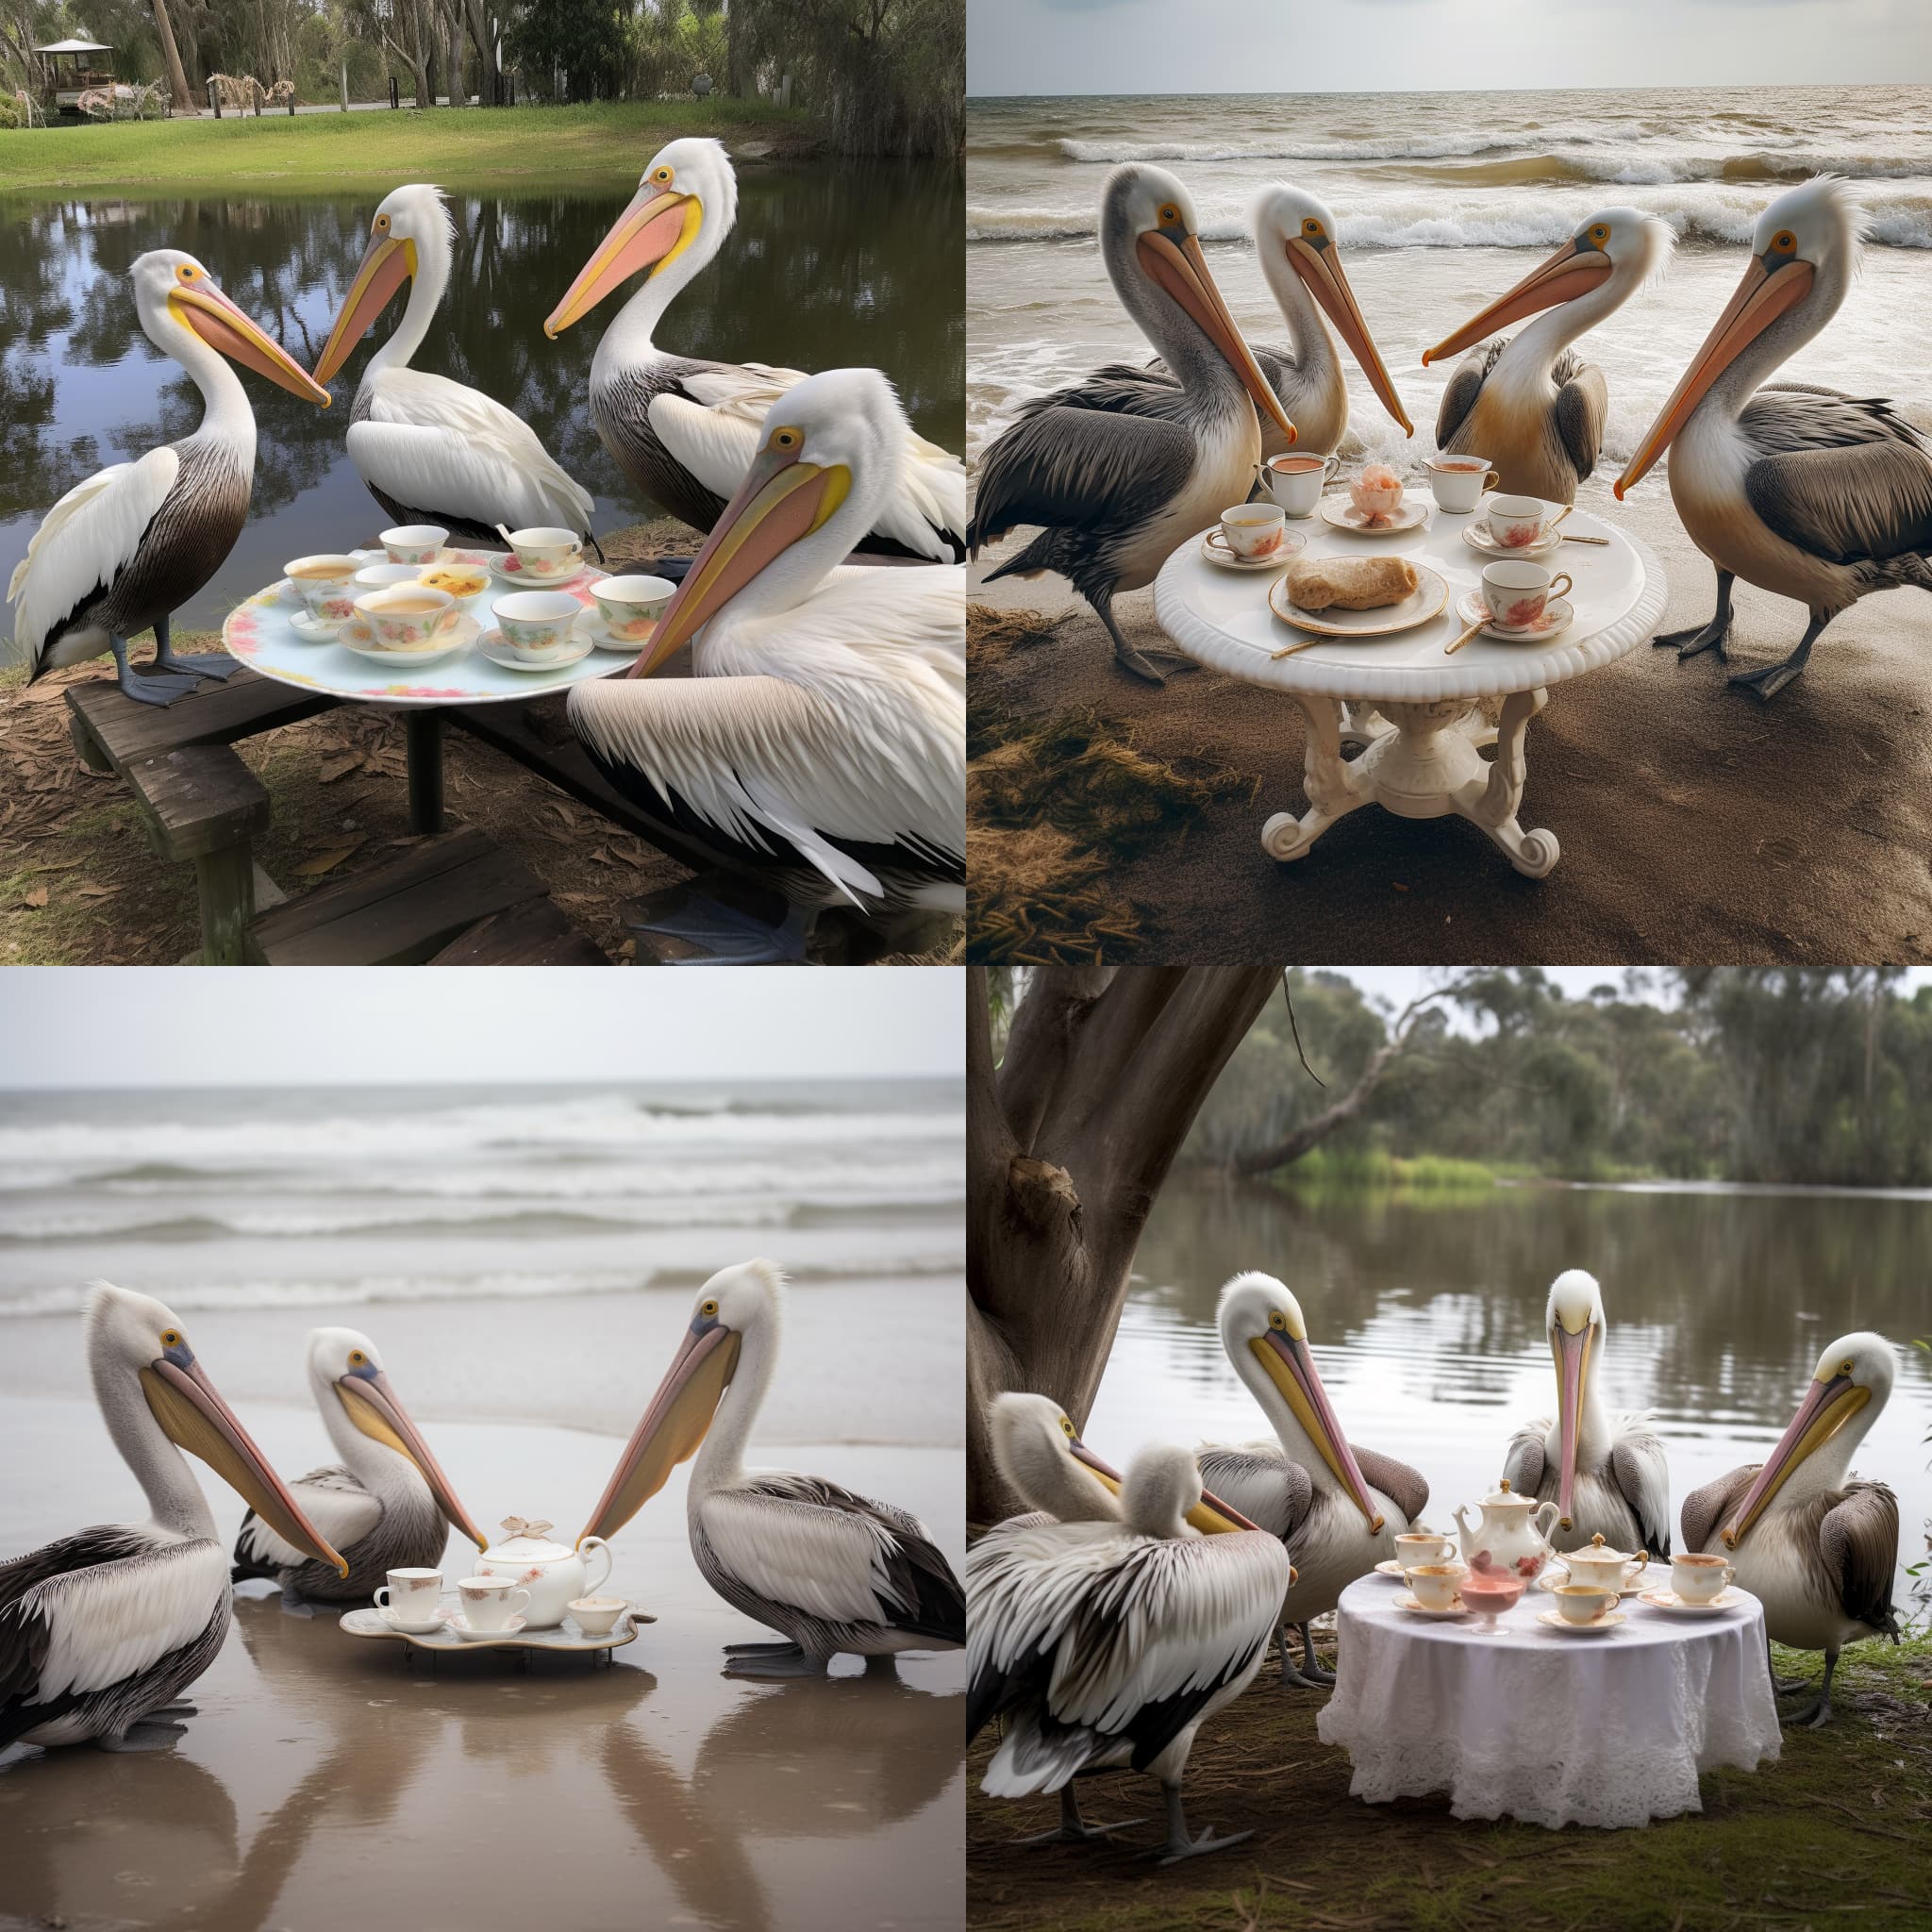 Four images of pelicans having a tea party. They are photo realistic, in a natural outdoor setting. None of the pelicans are holding their tea, they are just standing near the tea service.